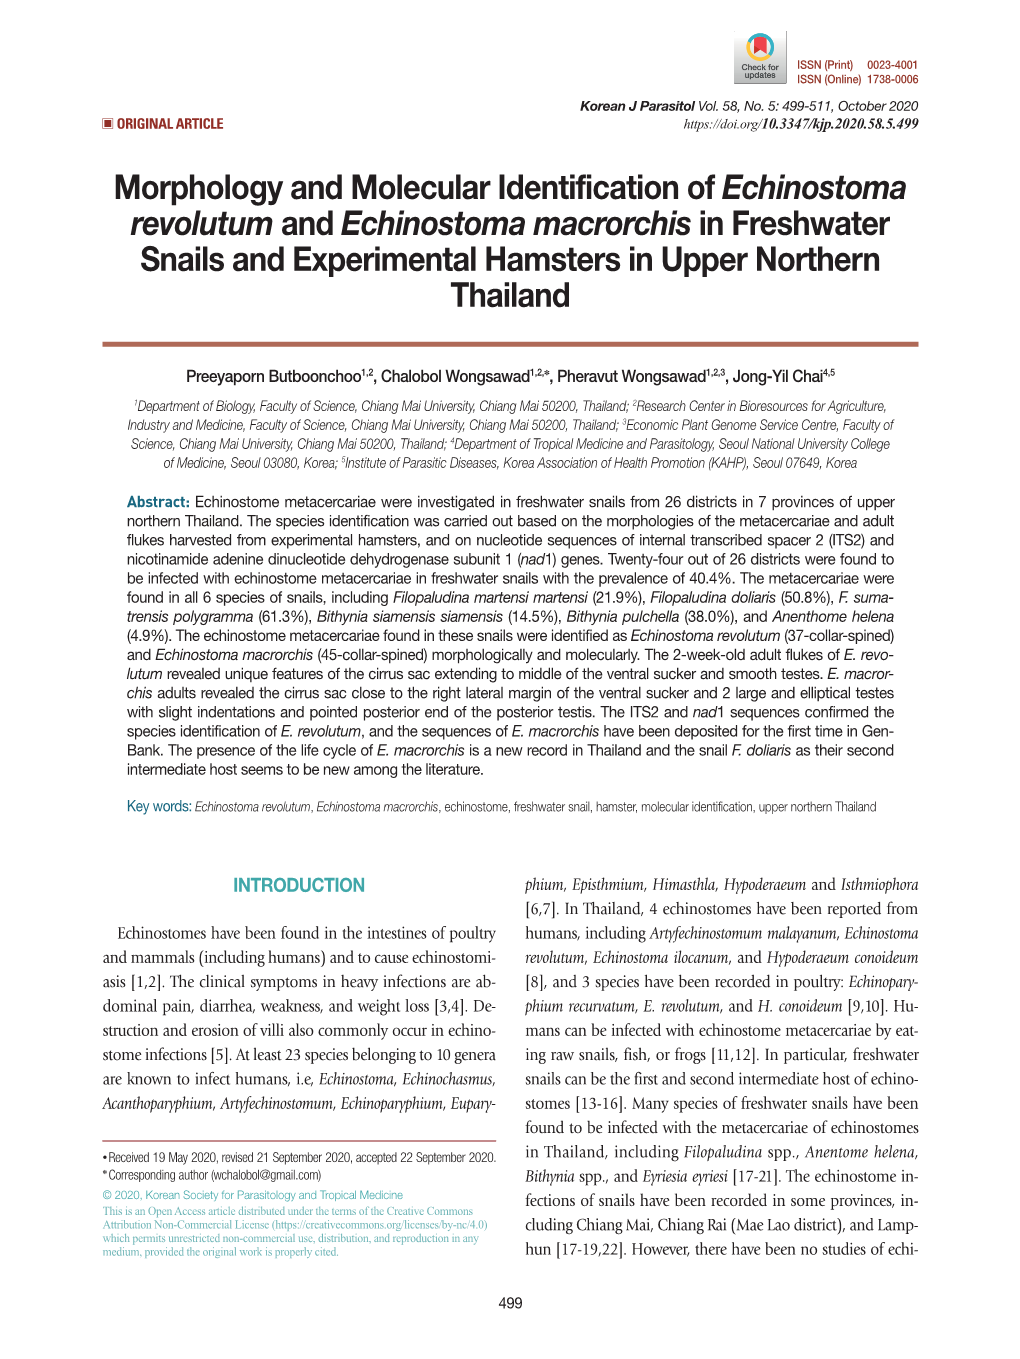 Echinostoma Revolutum and Echinostoma Macrorchis in Freshwater Snails and Experimental Hamsters in Upper Northern Thailand